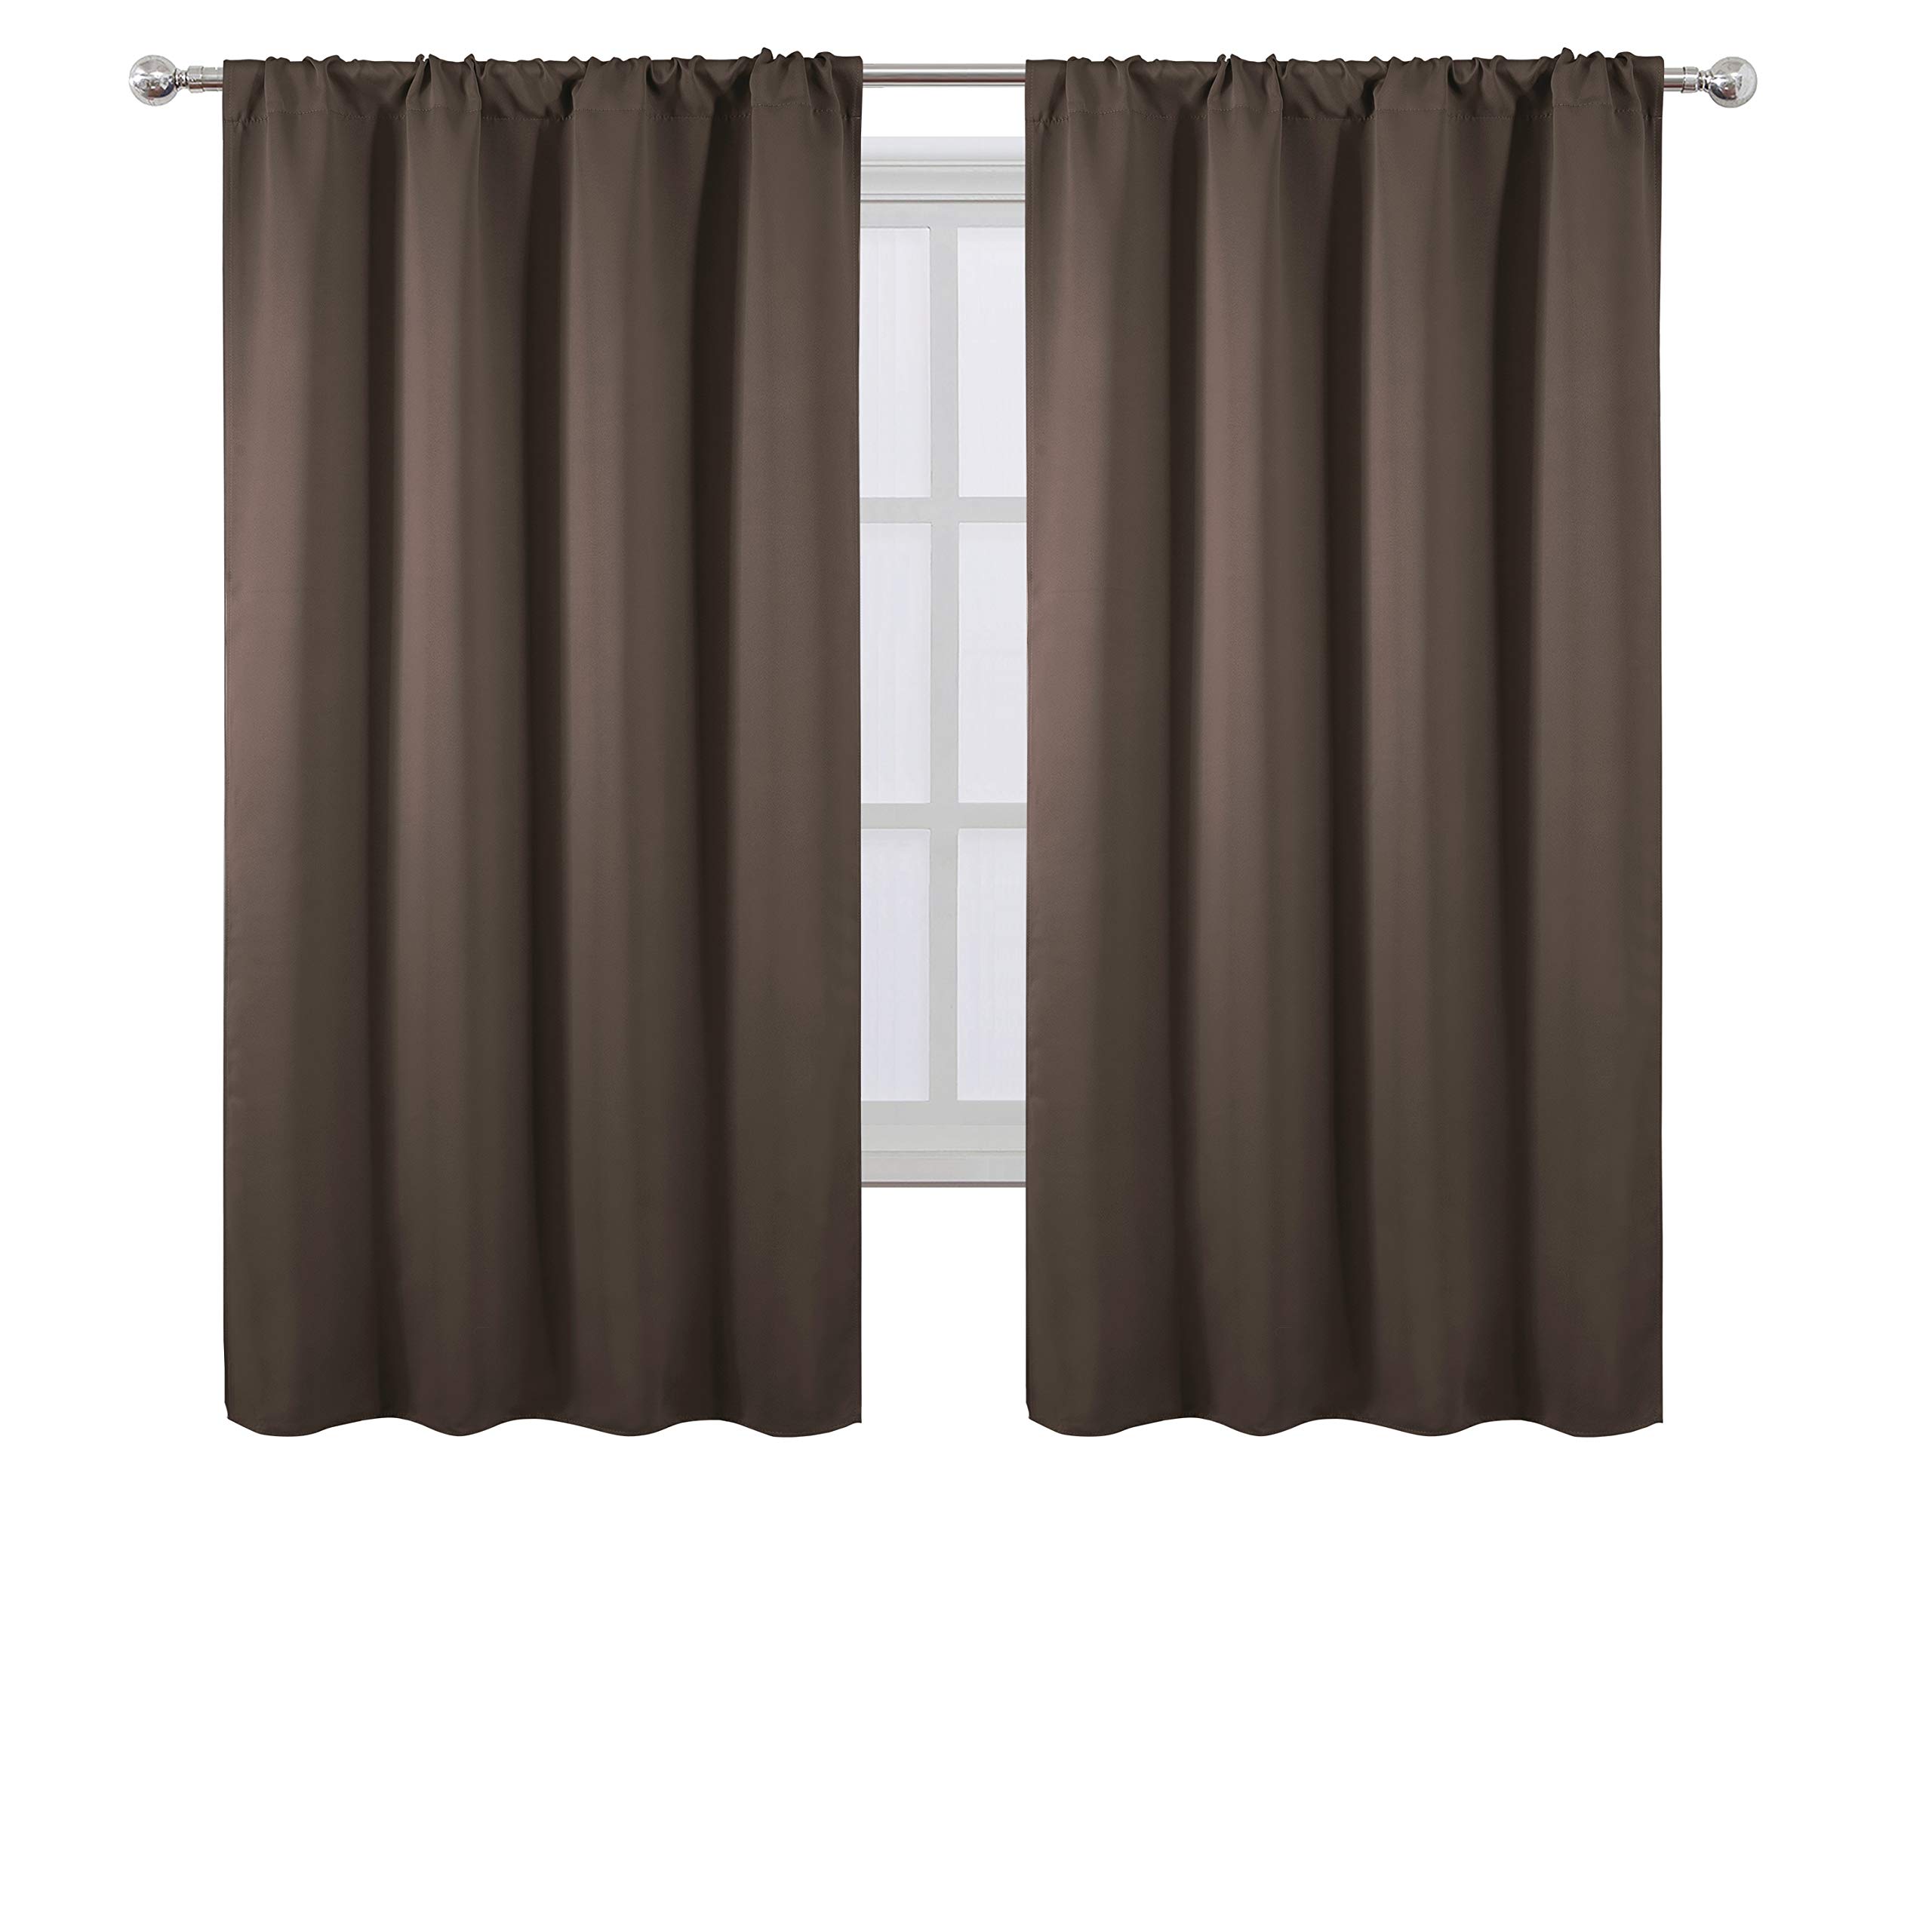 Lemomo Chocolate Brown Blackout Curtains/42 X 63 Inch/Set Of 2 Panels Room Darkening Curtains For Bedroom